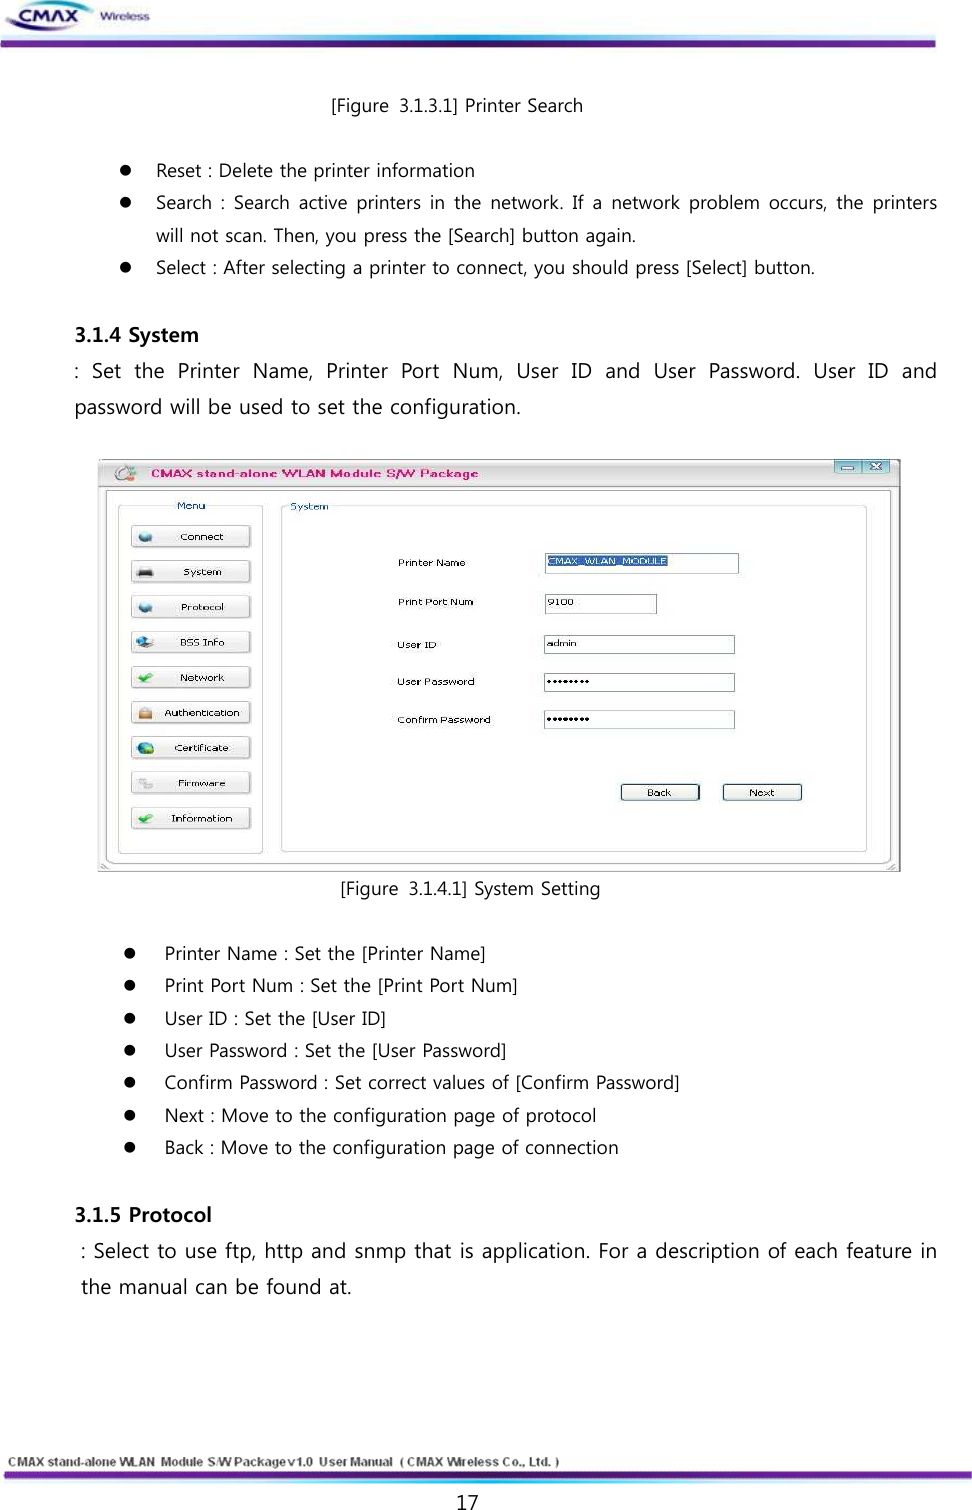   17  www.cmaxwireless.co.kr [Figure 3.1.3.1] Printer Search  l Reset : Delete the printer information l Search : Search active printers in  the  network. If a network  problem occurs, the printers will not scan. Then, you press the [Search] button again. l Select : After selecting a printer to connect, you should press [Select] button.    3.1.4 System :  Set  the  Printer  Name,  Printer  Port  Num,  User  ID  and  User  Password.  User  ID  and password will be used to set the configuration.     [Figure 3.1.4.1] System Setting  l Printer Name : Set the [Printer Name] l Print Port Num : Set the [Print Port Num] l User ID : Set the [User ID] l User Password : Set the [User Password] l Confirm Password : Set correct values of [Confirm Password] l Next : Move to the configuration page of protocol l Back : Move to the configuration page of connection  3.1.5 Protocol : Select to use ftp, http and snmp that is application. For a description of each feature in the manual can be found at.  